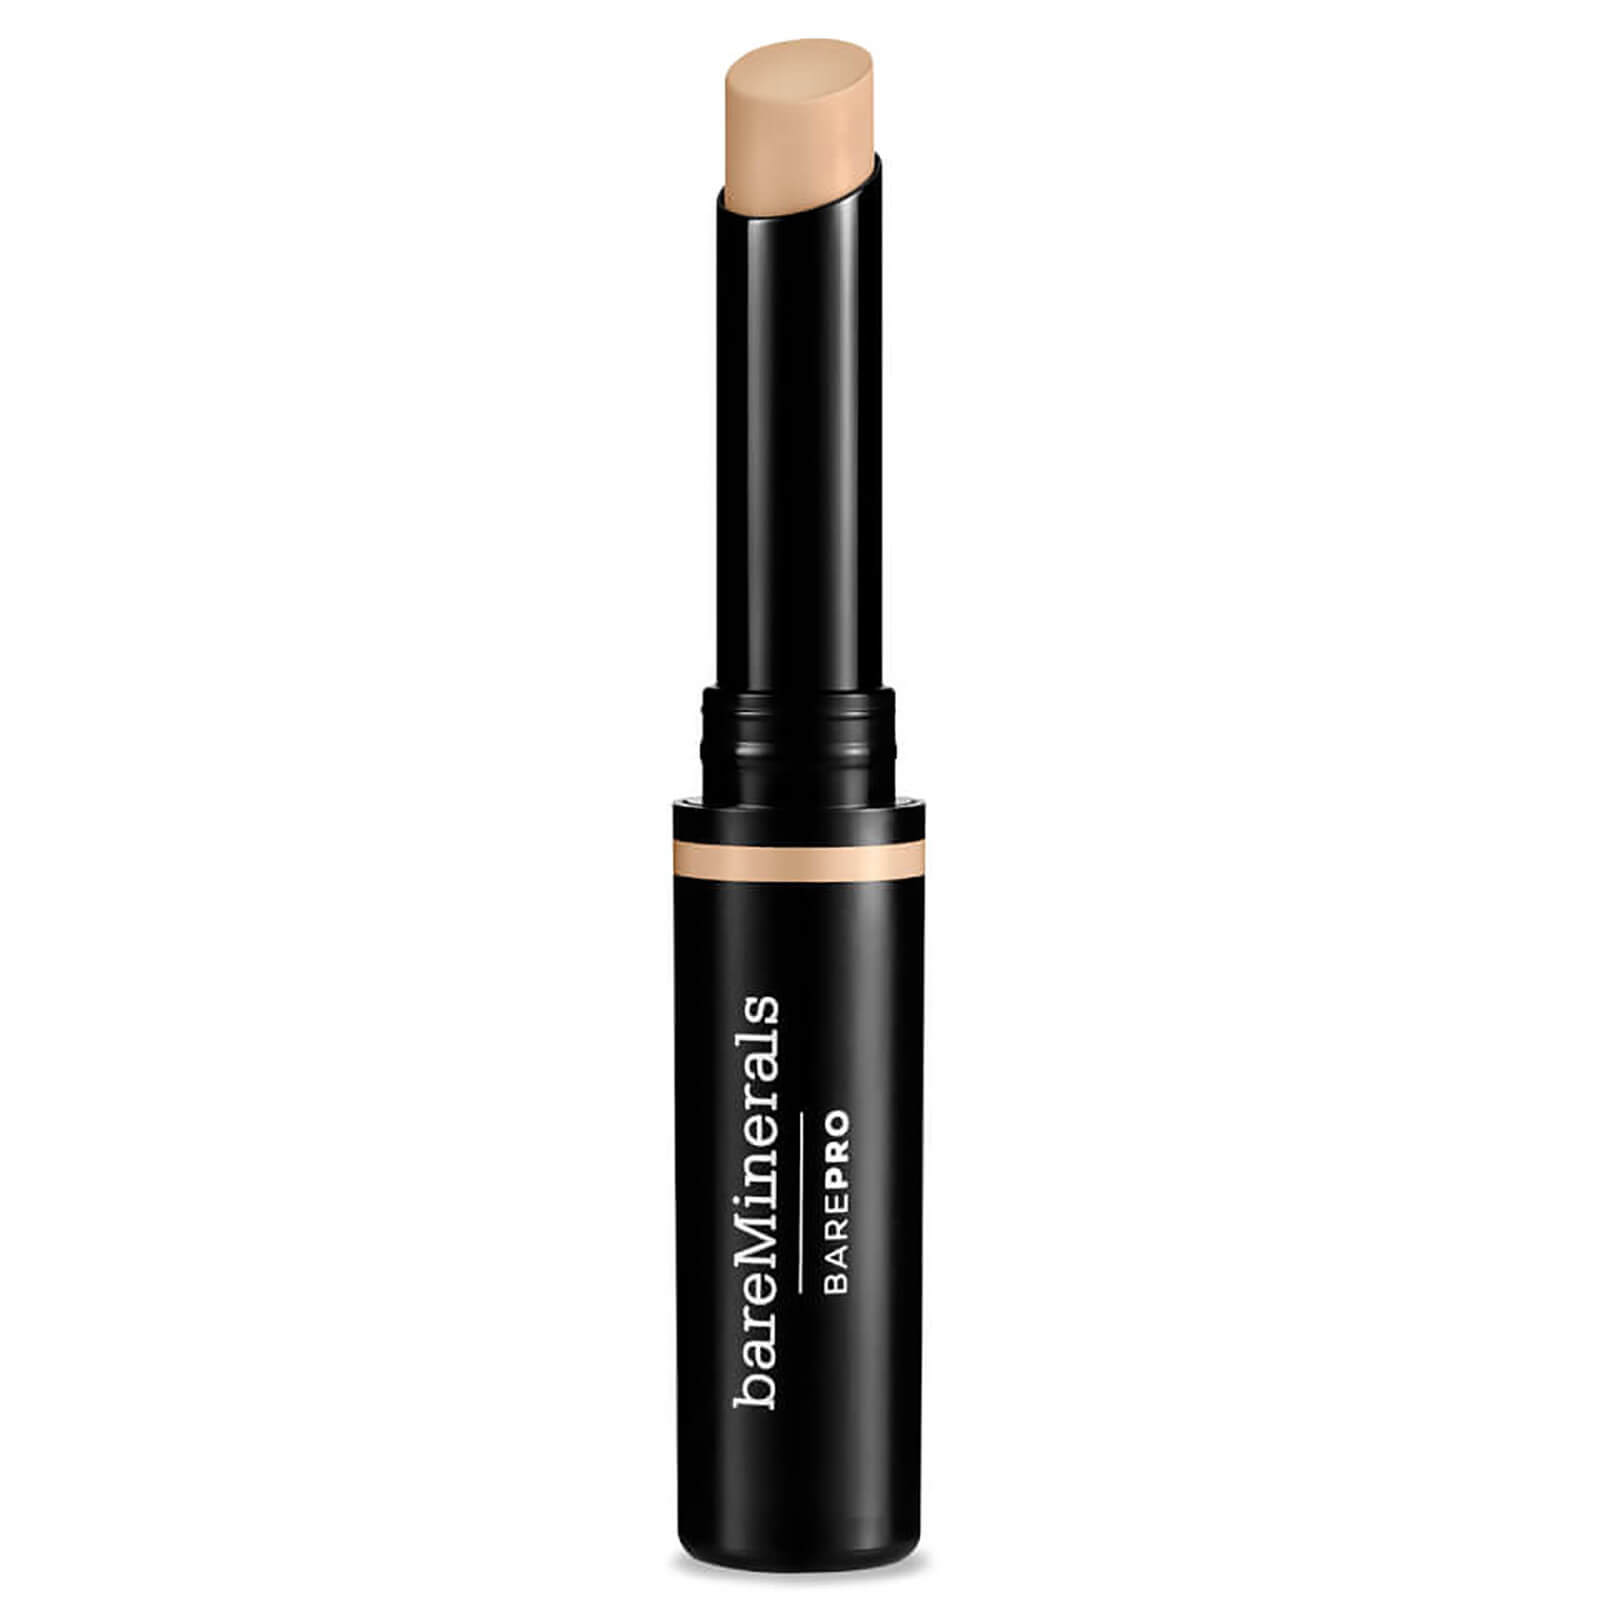 bareMinerals Barepro 16-Hour Concealer Cream 2.5g (Various Shades) - Cool 01